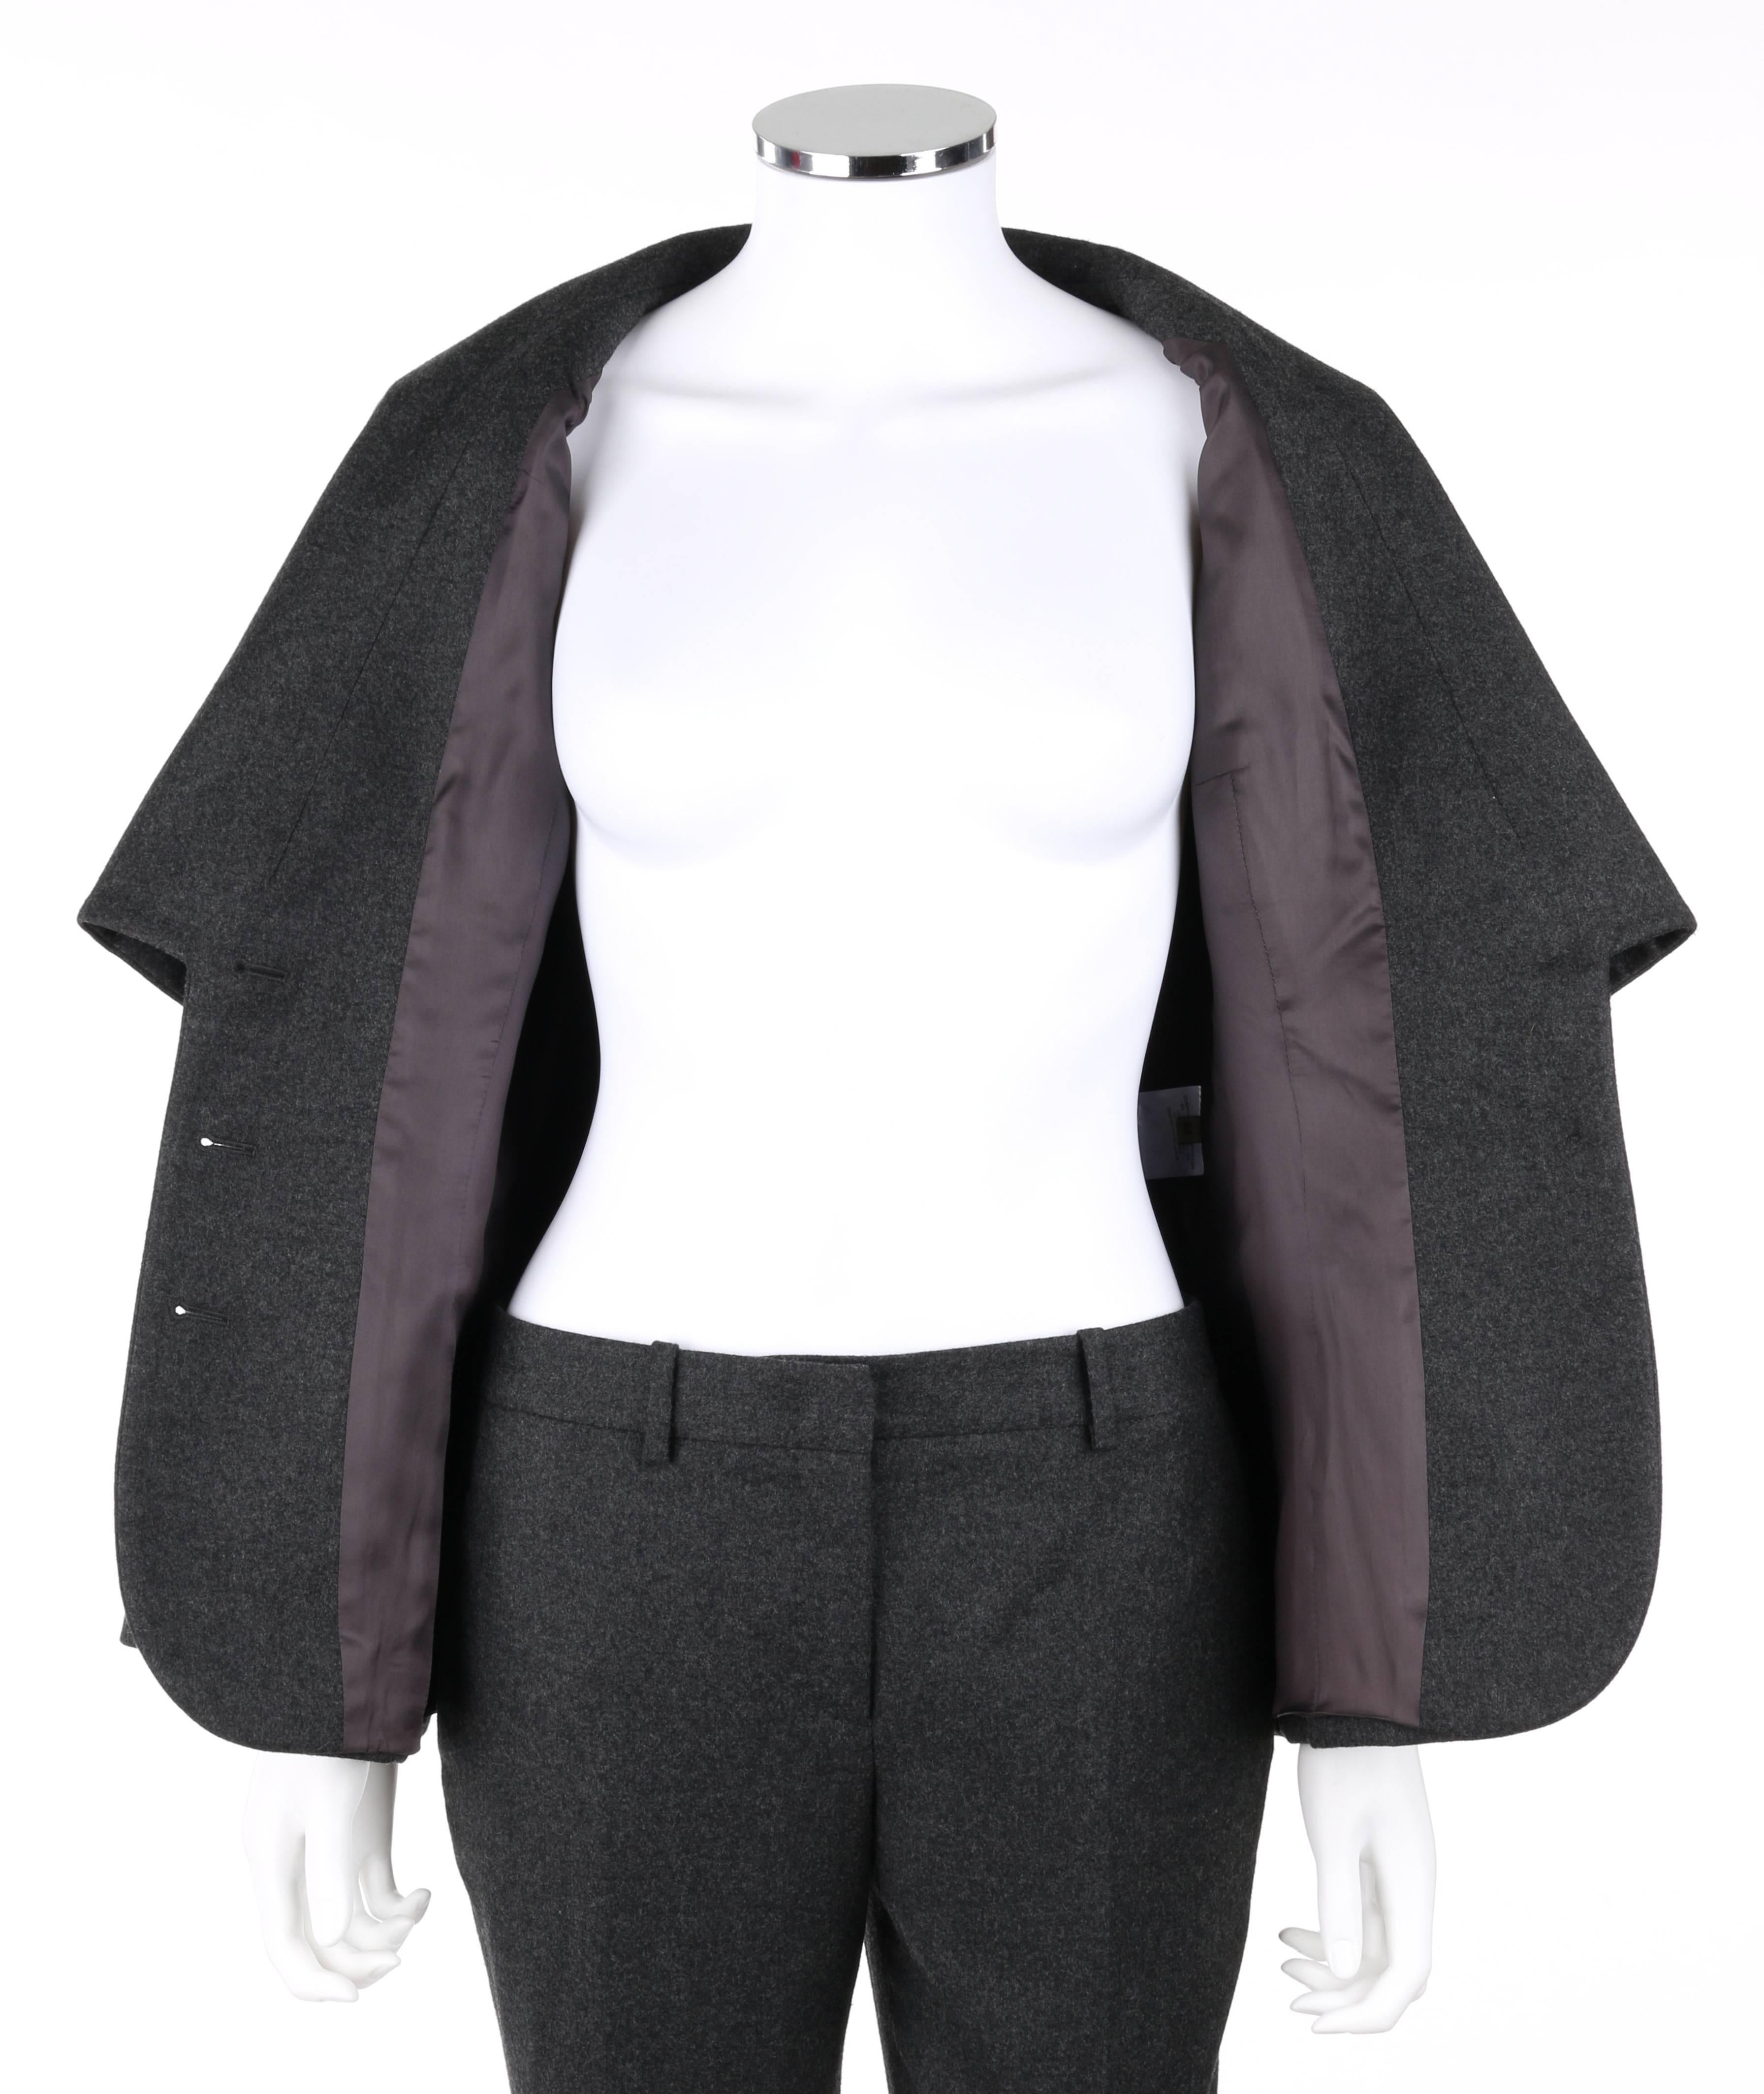 ALEXANDER McQUEEN Pre-Fall 2009 2 Piece Gray Wool Cashmere Blazer Pant Suit Set In Excellent Condition For Sale In Thiensville, WI